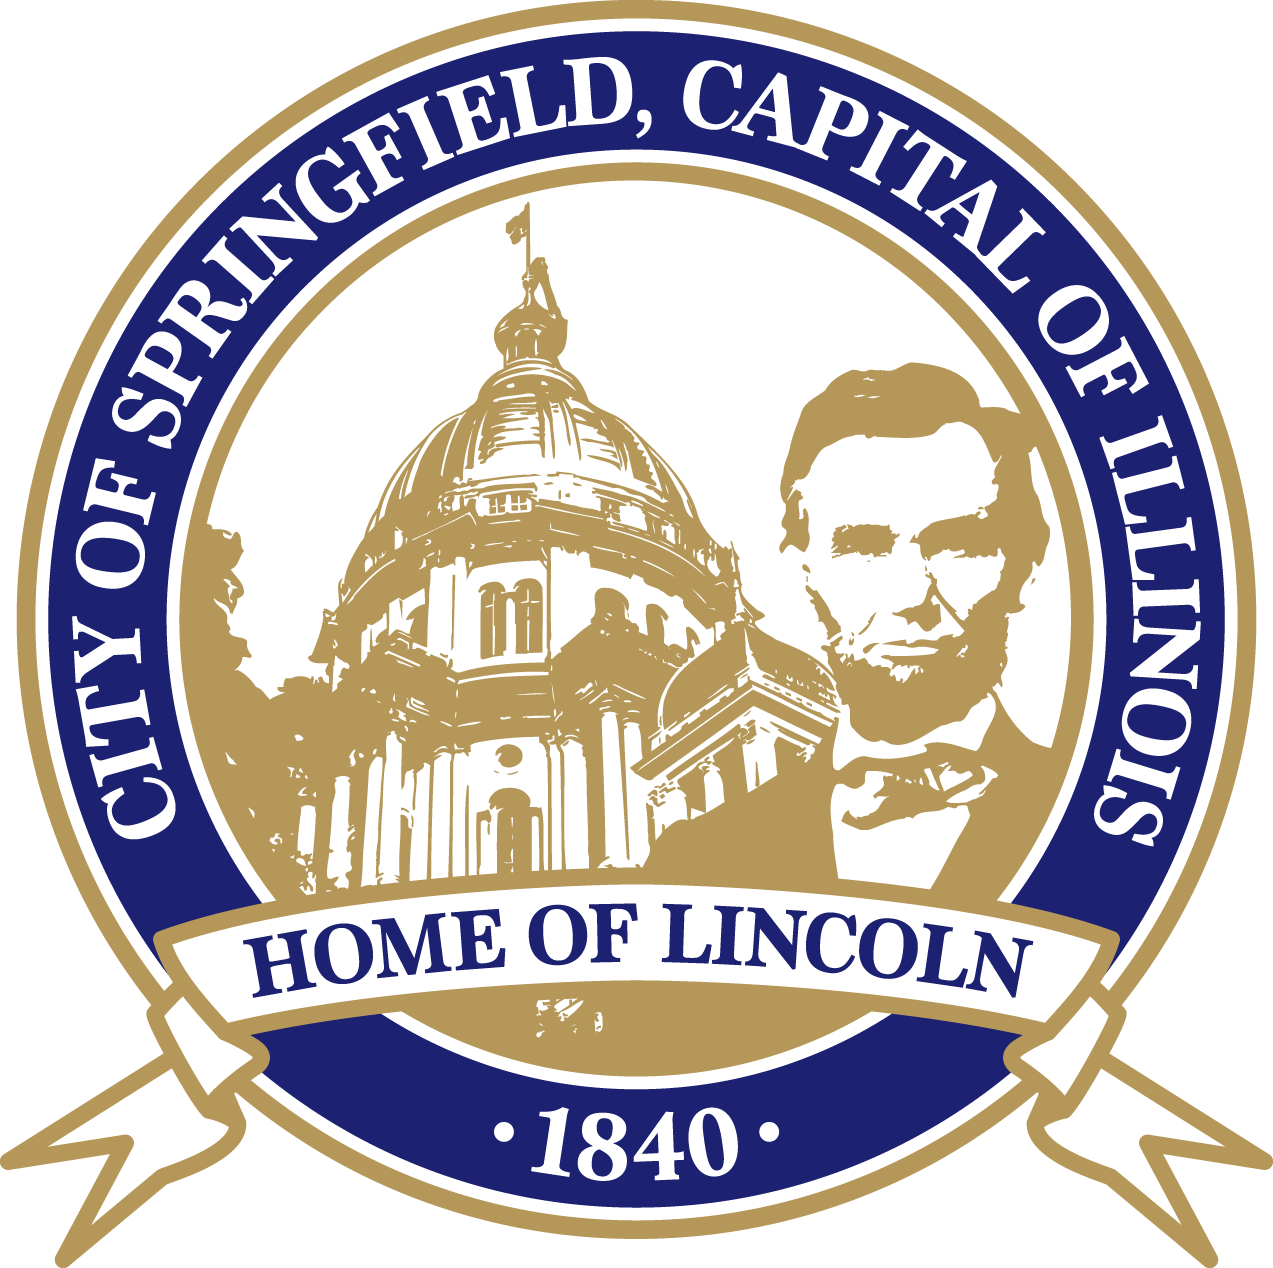 Springfield City seal: Reads, "City of Springfield, Capital of Illinois, Home of Lincoln, 1840"